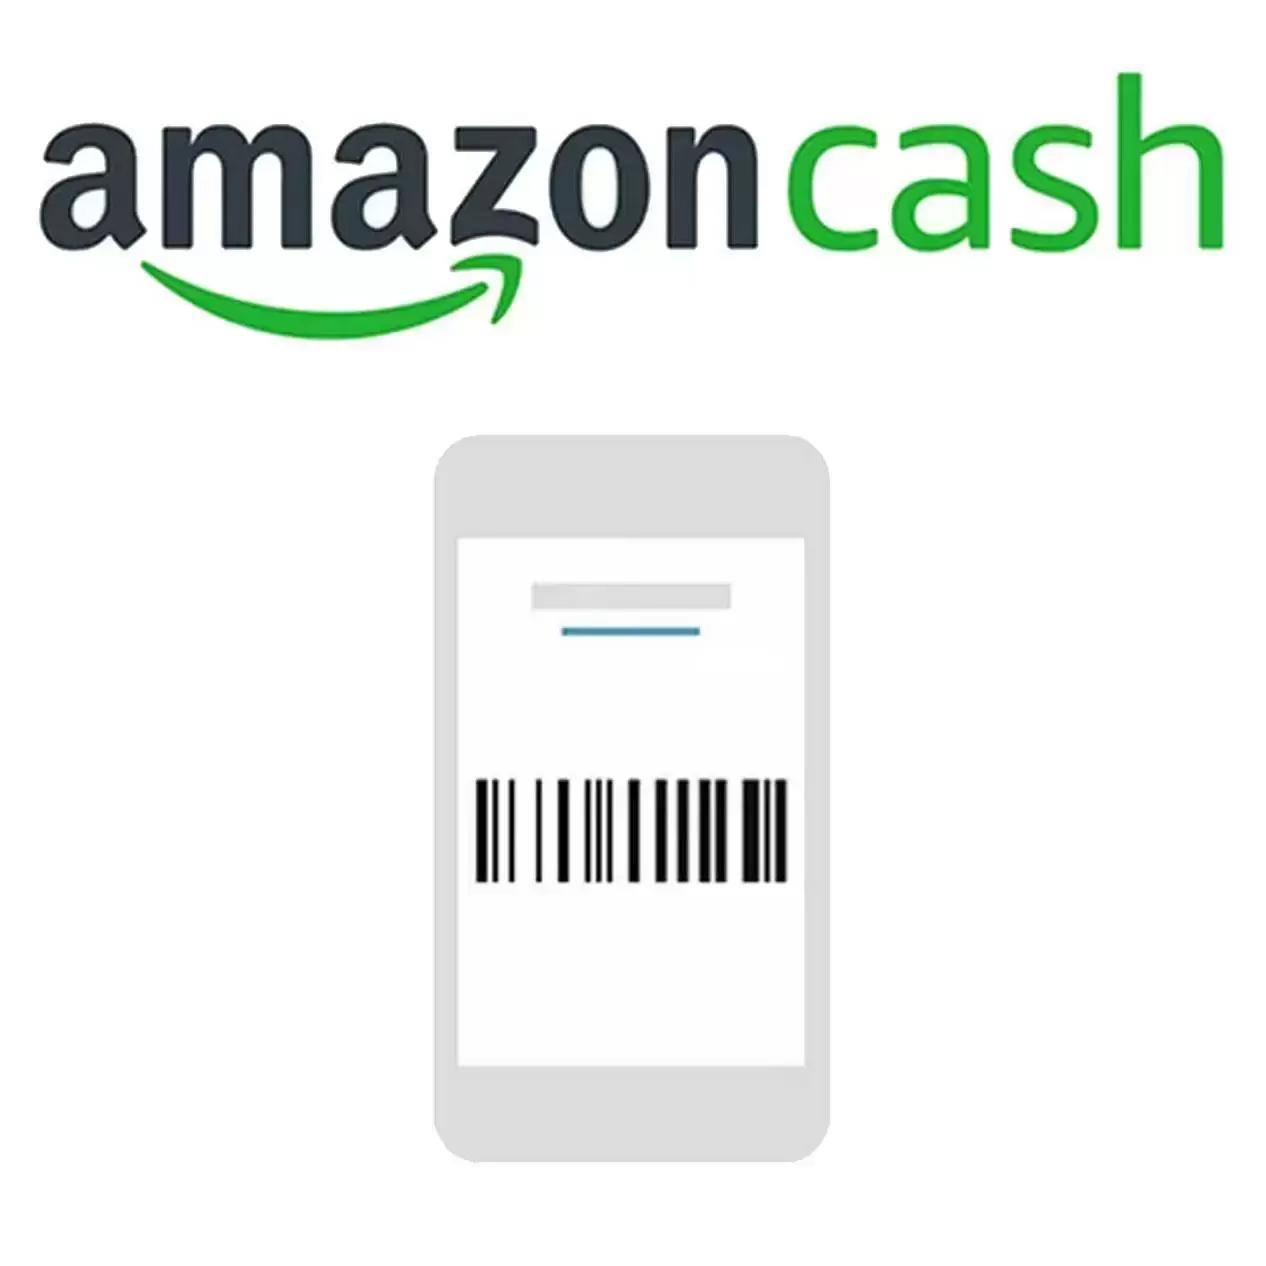 Free $10 Amazon Credit for Buying $50 in Amazon Cash